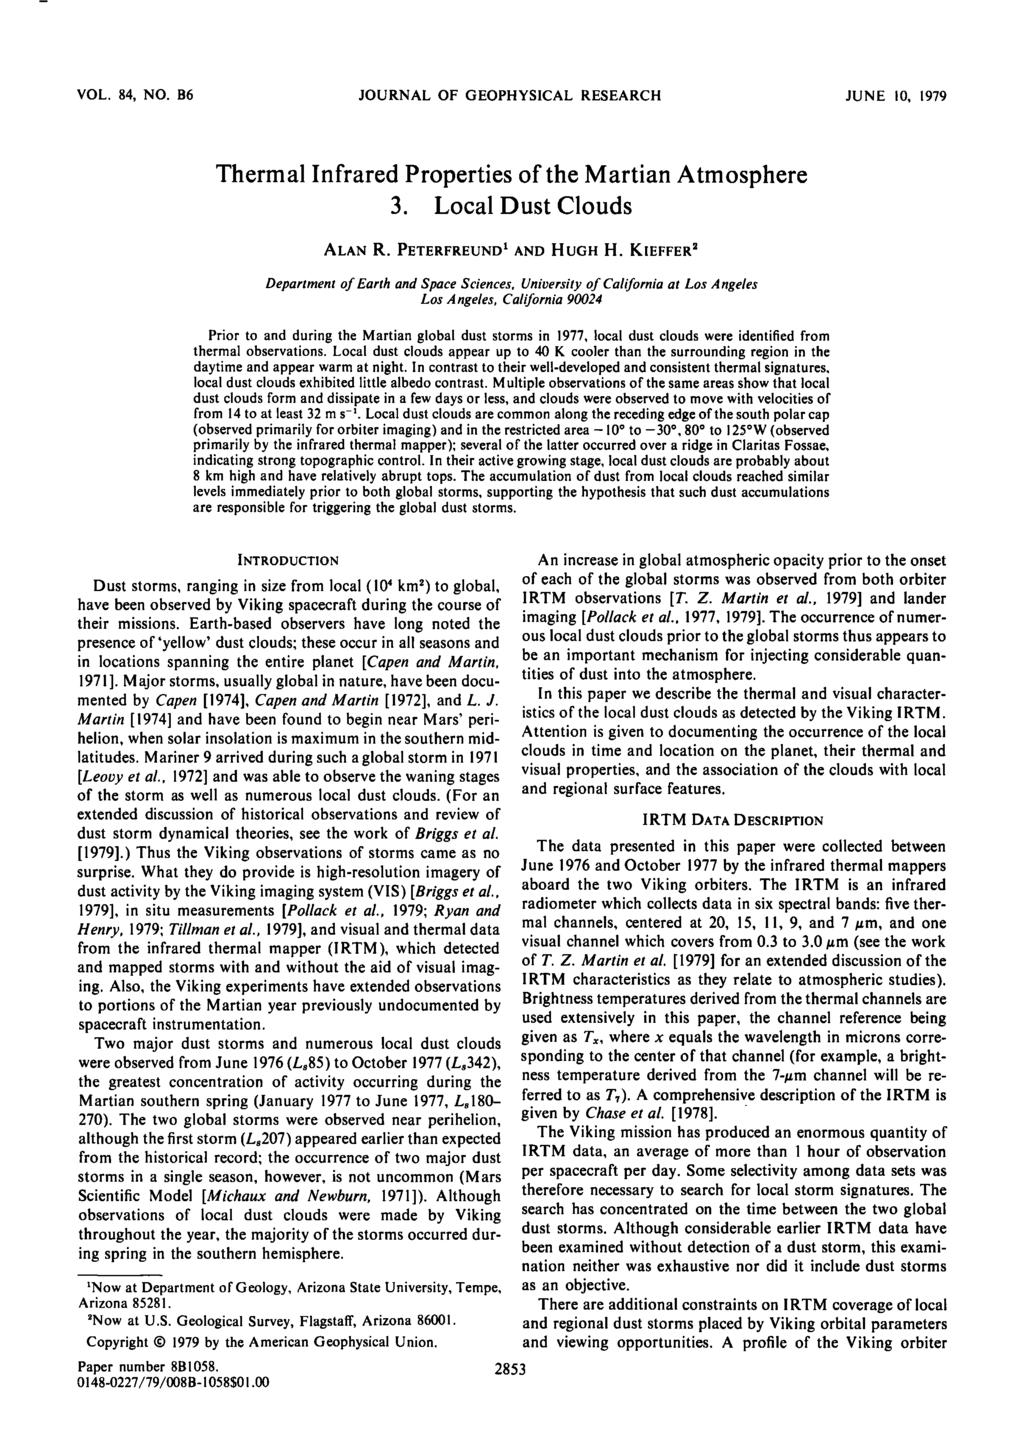 VOL. 84, NO. B6 JOURNAL OF GEOPHYSICAL RESEARCH JUNE 10, 1979 Thermal Infrared Properties of the Martian Atmosphere 3. Local Dust Clouds ALAN R. PETERFREUND AND HUGH H.